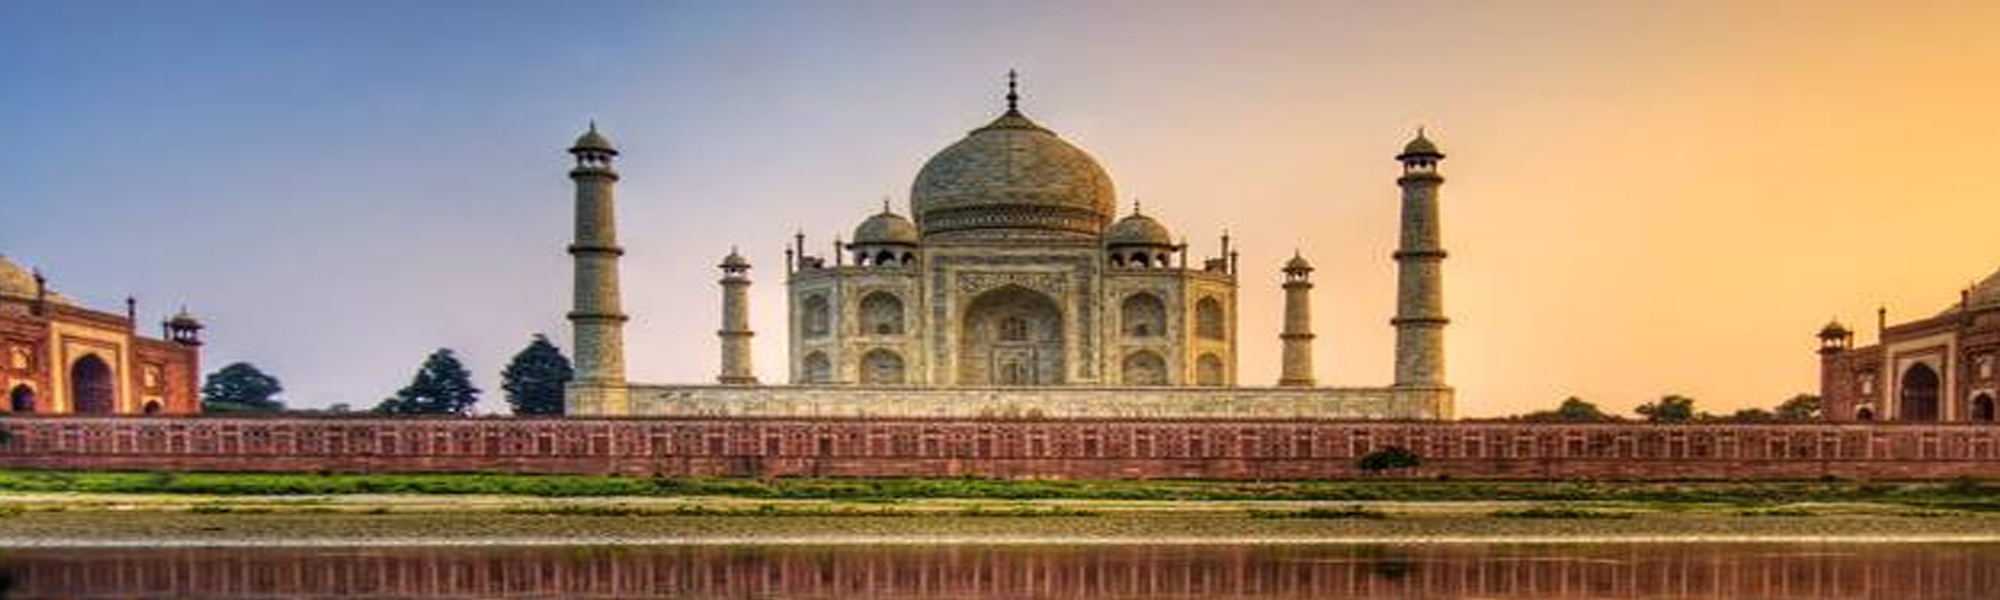 Golden Triangle Budget Tours in India 